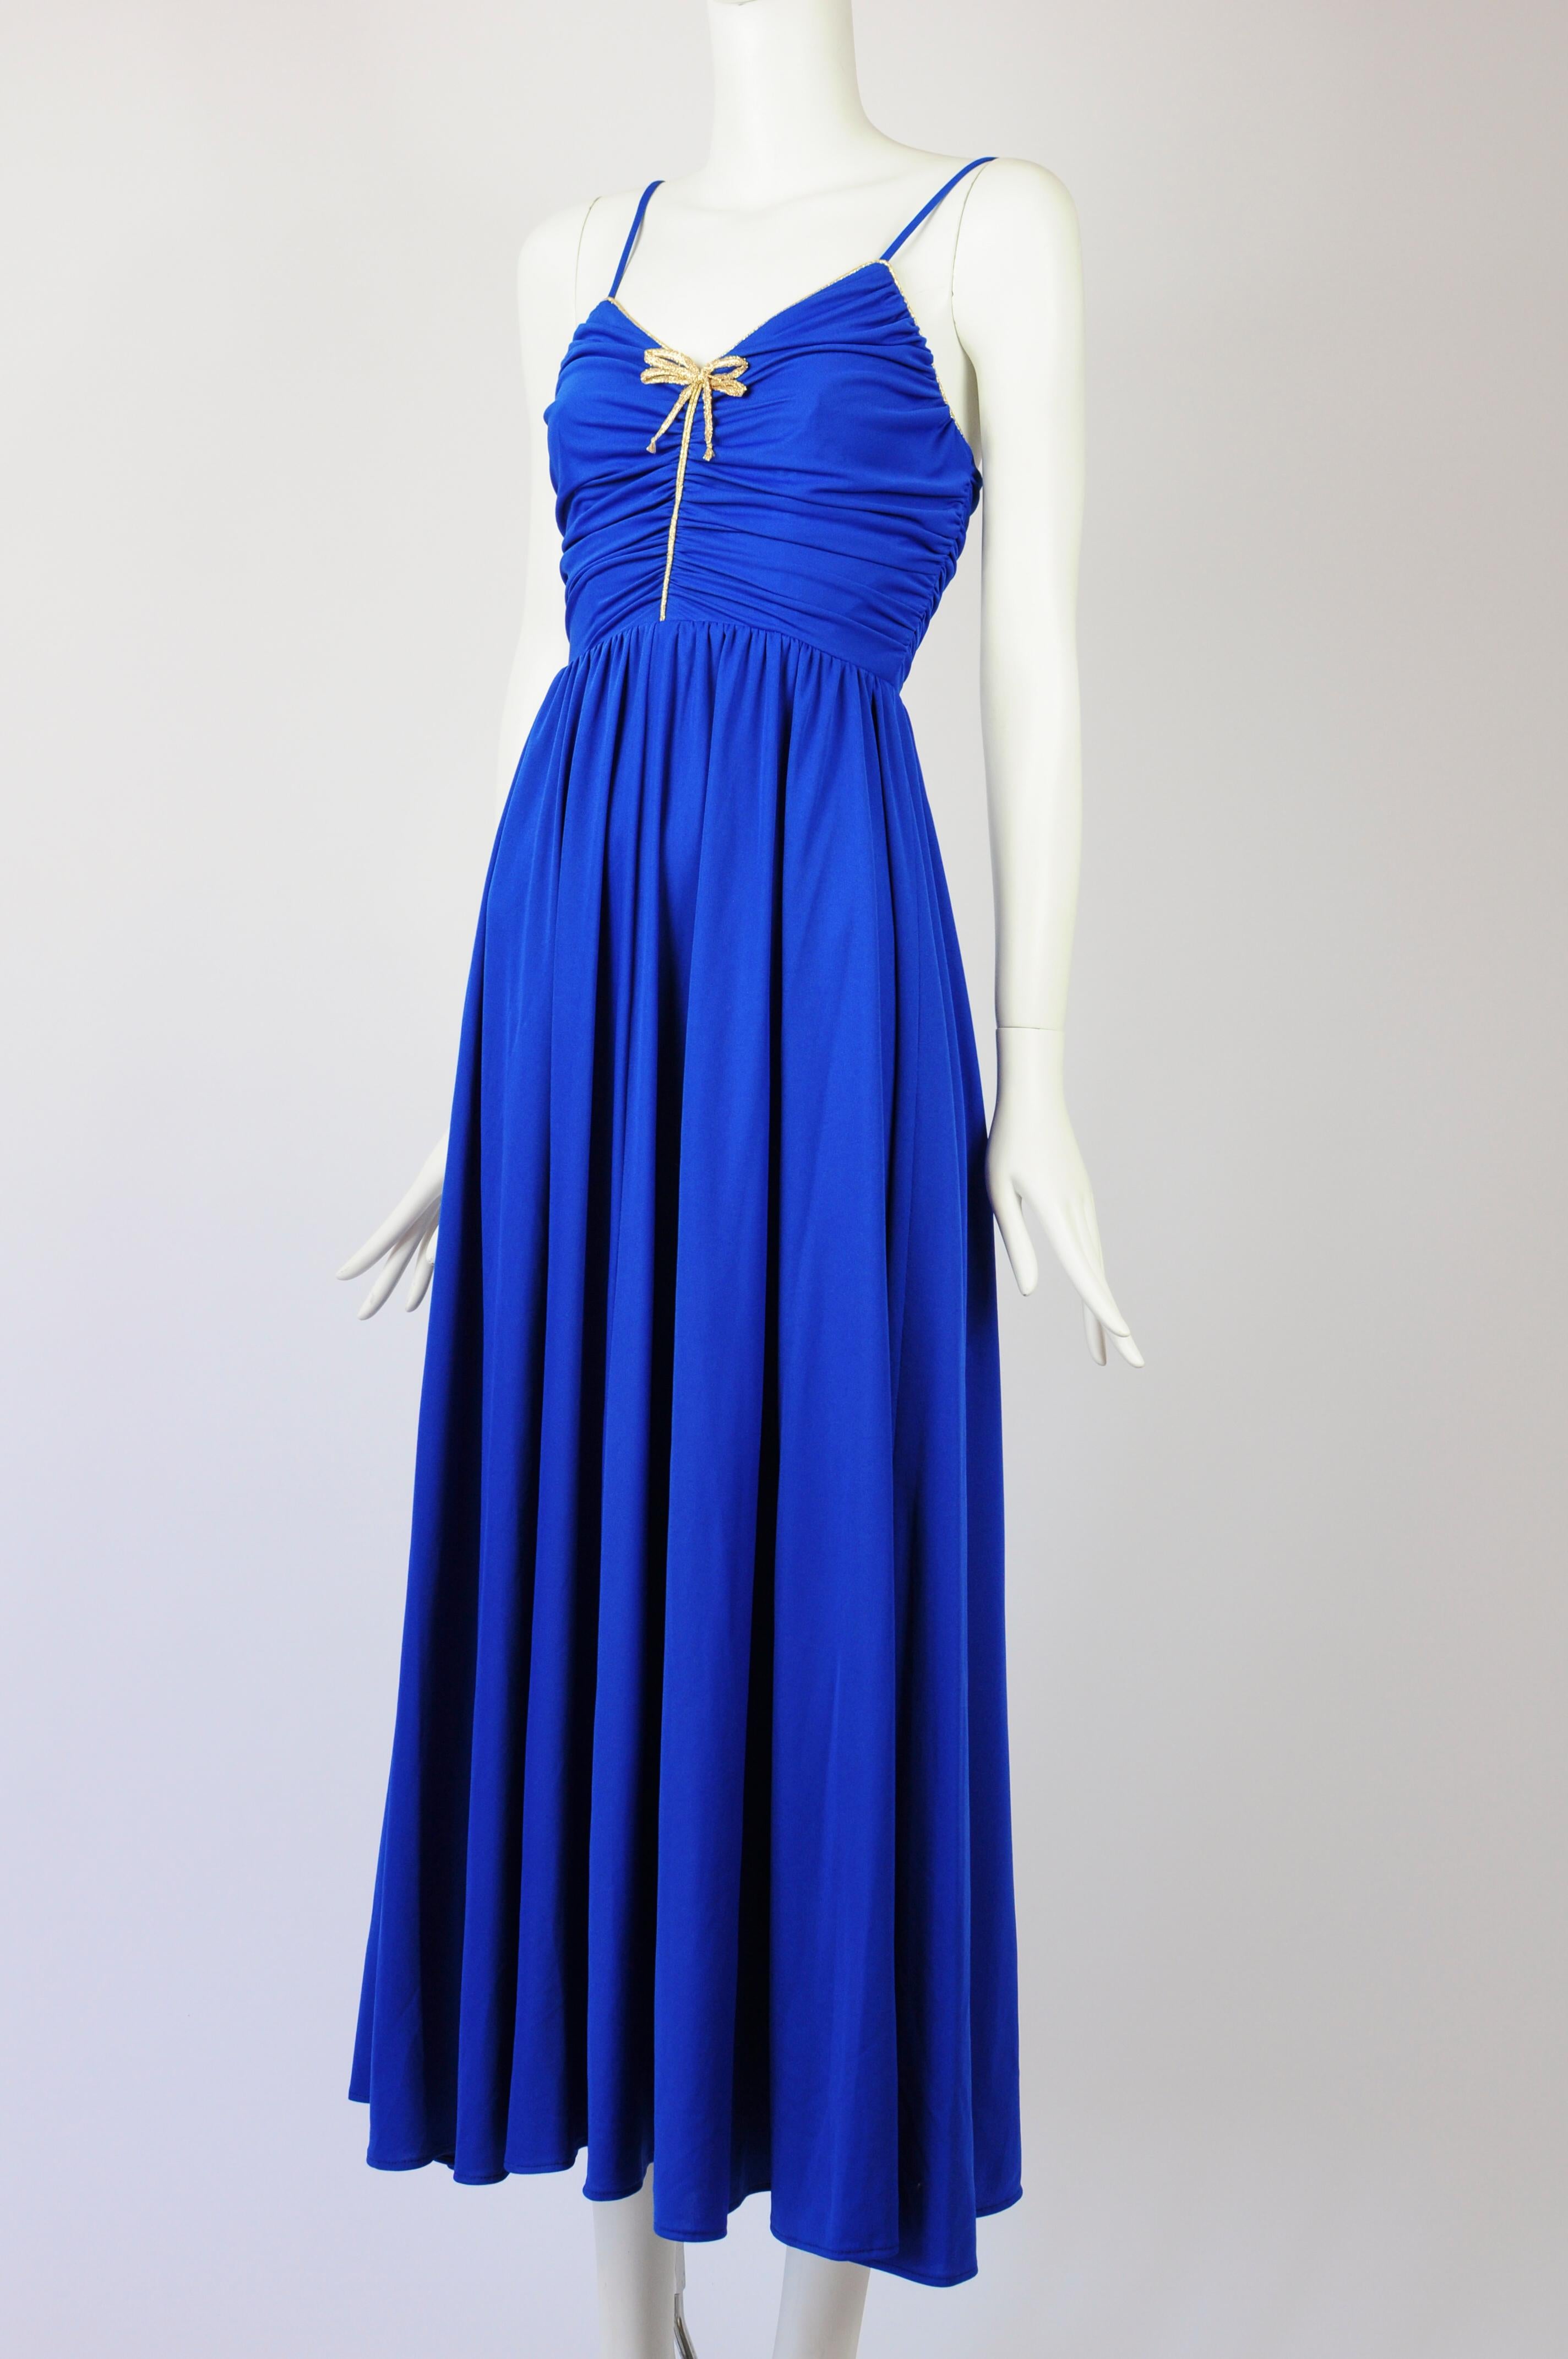 A Trina Lewis & Marjon Couture af Baker Sportswear London vintage dress in royal blue with gold piping and bow details. The dress bodice is beautifully pleated and the royal blue fabric gathers in front where the gold piping detail and gold bow are